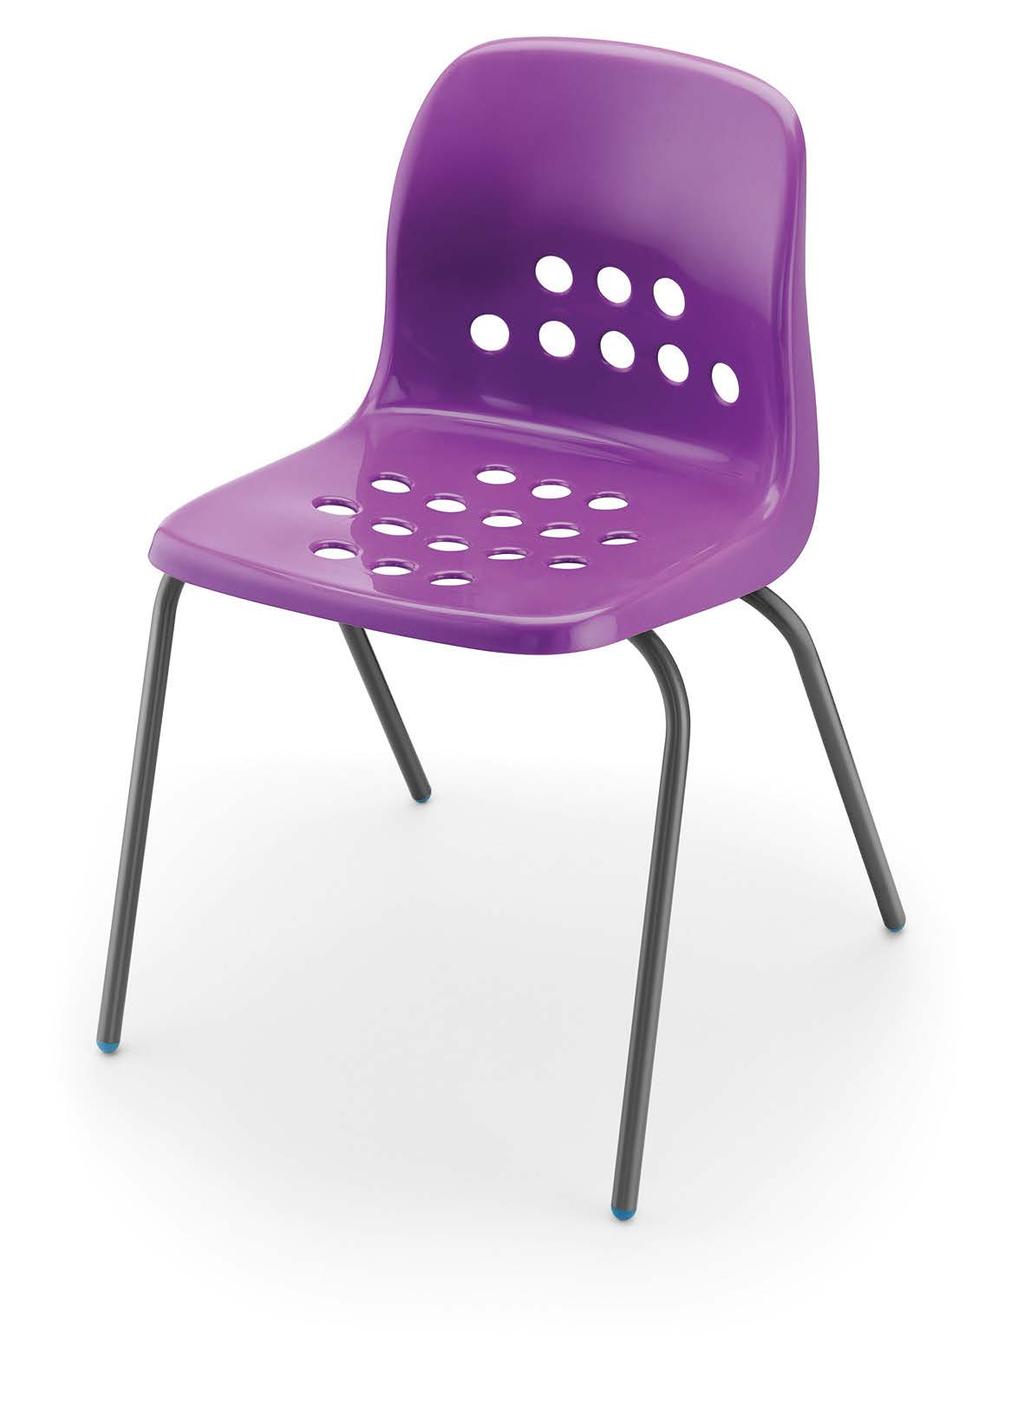 Pepperpot chair PEPC5 430mm 490mm PEPC6 460mm 490mm Pepperpot stool Exciting colour ranges